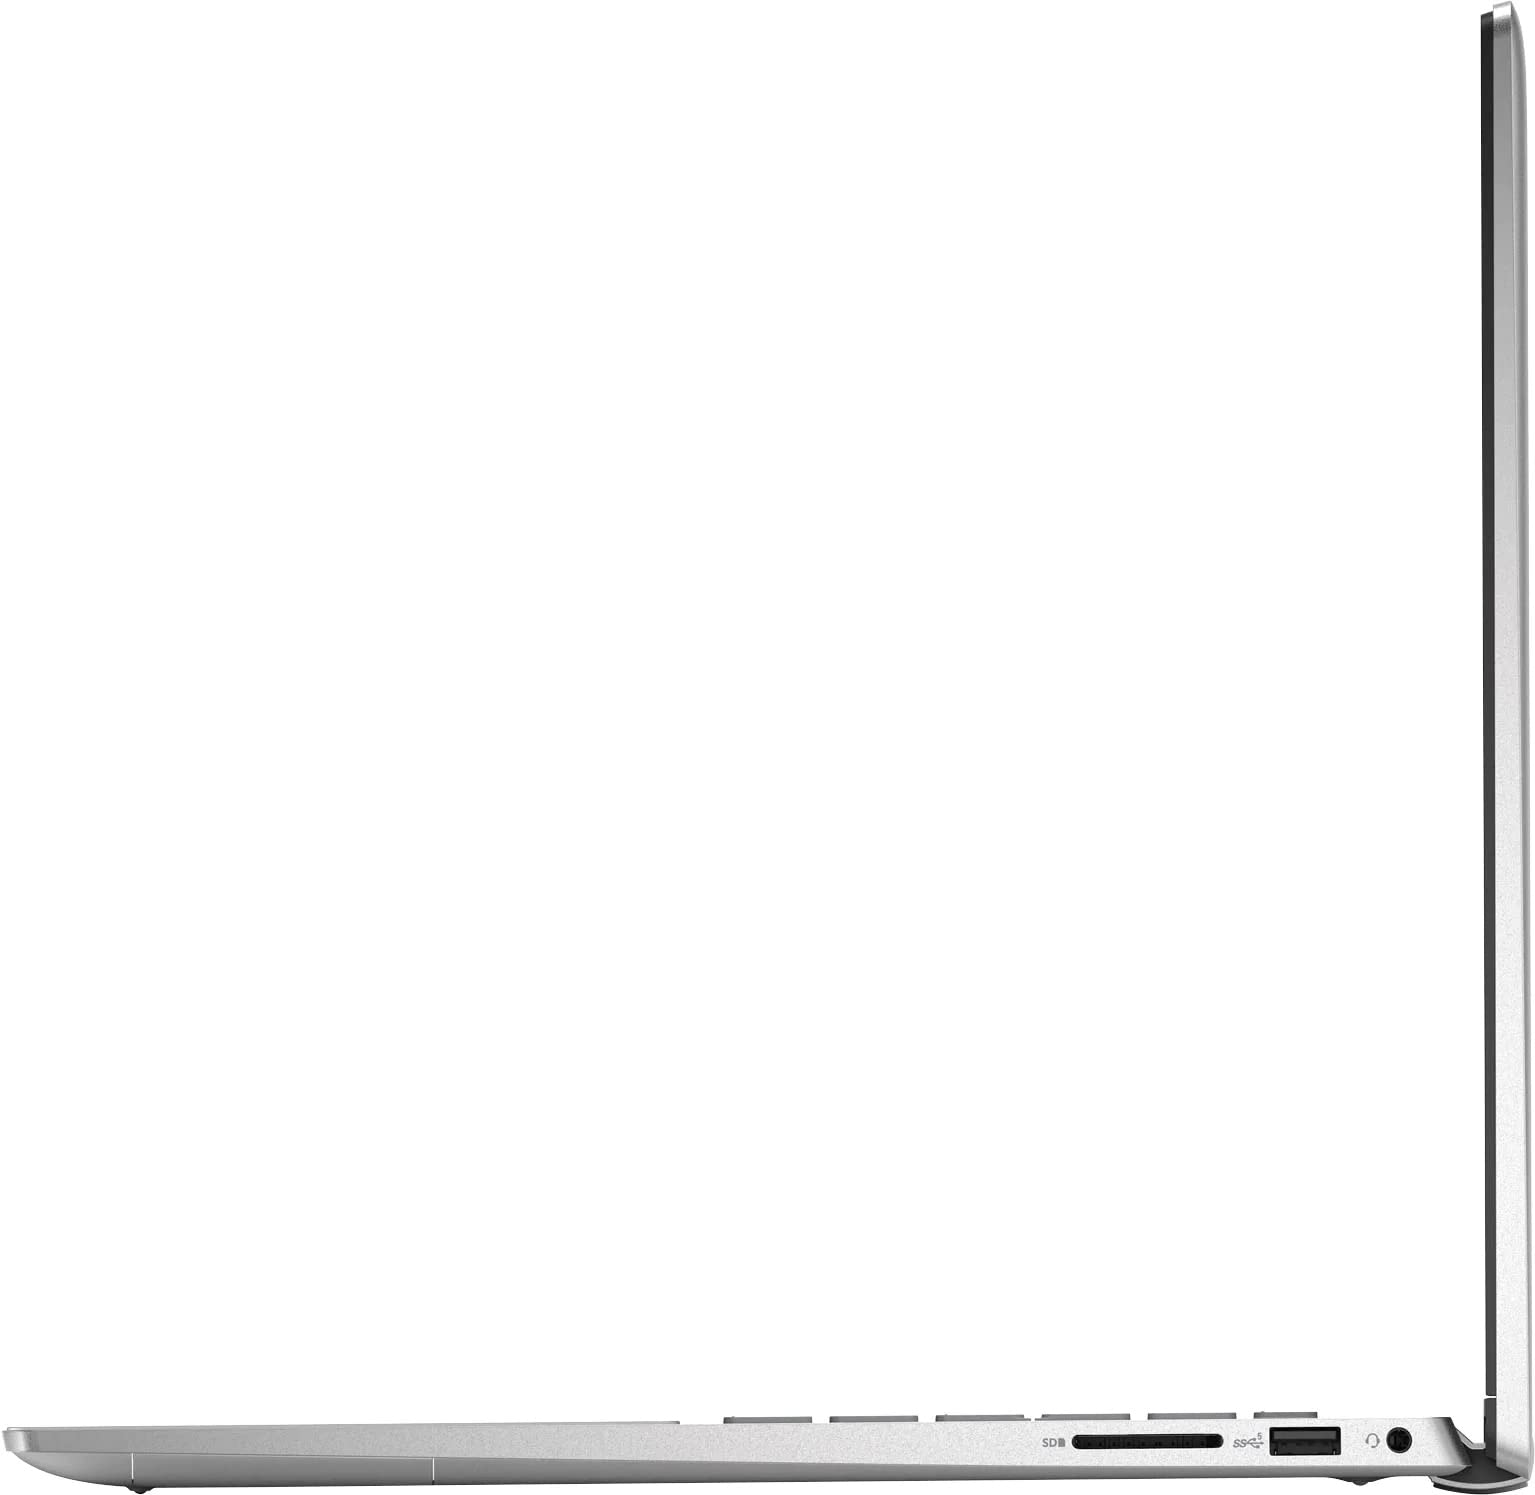 Dell Inspiron 7000 Series 2-in-1 Laptop 2022 | 16" FHD+ Touchscreen | 10-Core 12th Intel i5-1235U Iris Xe Graphics | 32GB DDR4 1TB NVMe SSD | Thunderbolt 4 WiFi 6E Backlit KB w/FP | Win 10